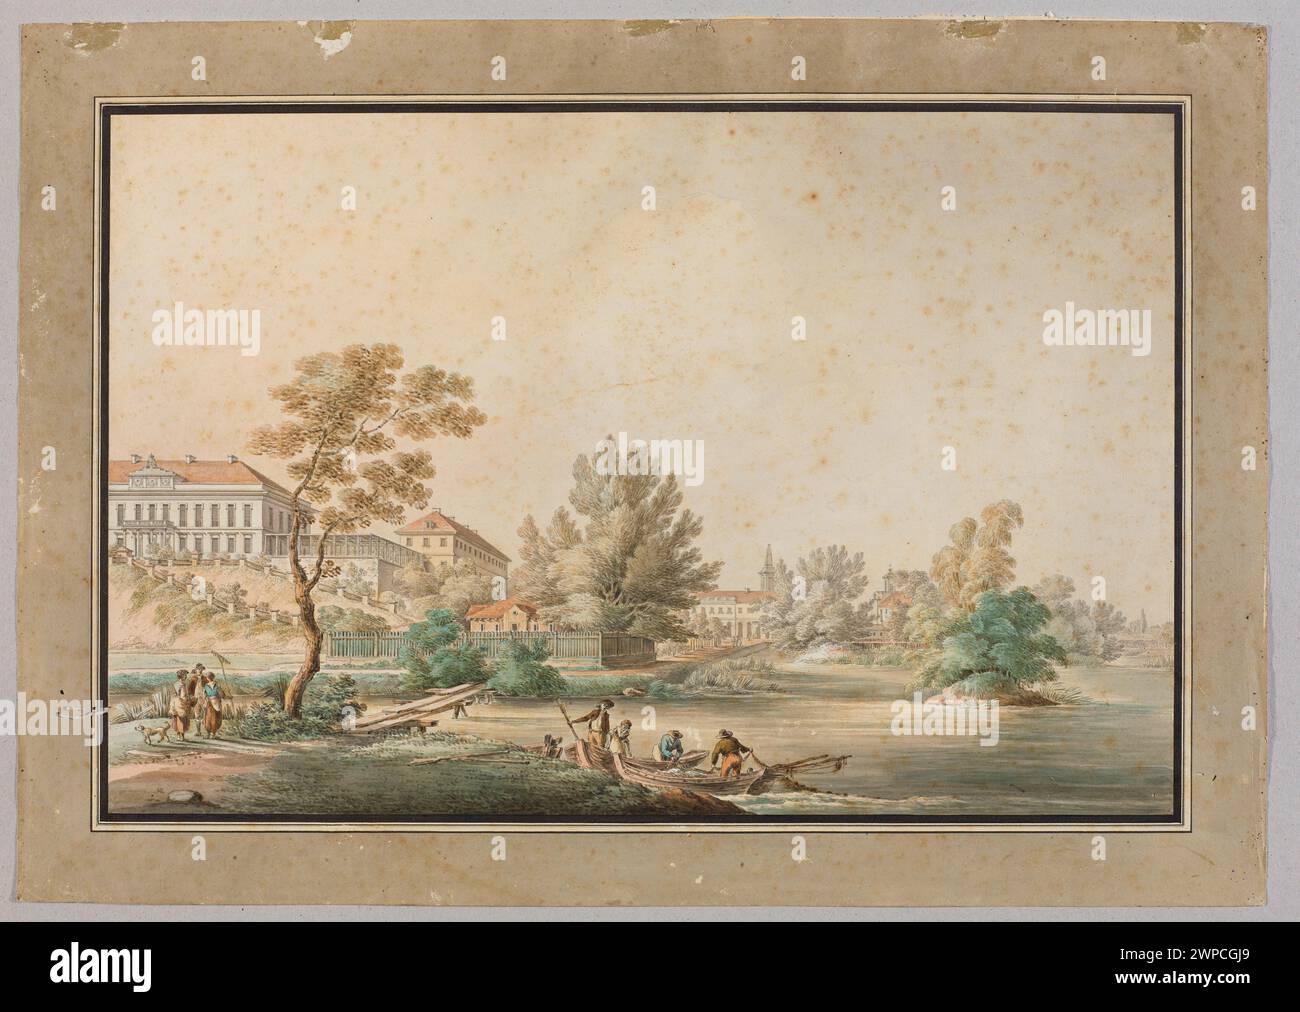 View of the palace and park in Kock from the river side; Vogel, Zygmunt (1764-1826); around 1796 (1794-00-00-1798-00-00);Jabłonowski (family) - residences, Kock (Lubelskie Voivodeship), Stanisława - collection, Szeptycka, Szymon Bogumił (1733-1807) - architecture, Zug, architecture, classicism (style), towns, parks (gardens), palaces (architect. ), landscapes, fishermen, rivers, purchase (provenance), boats Stock Photo